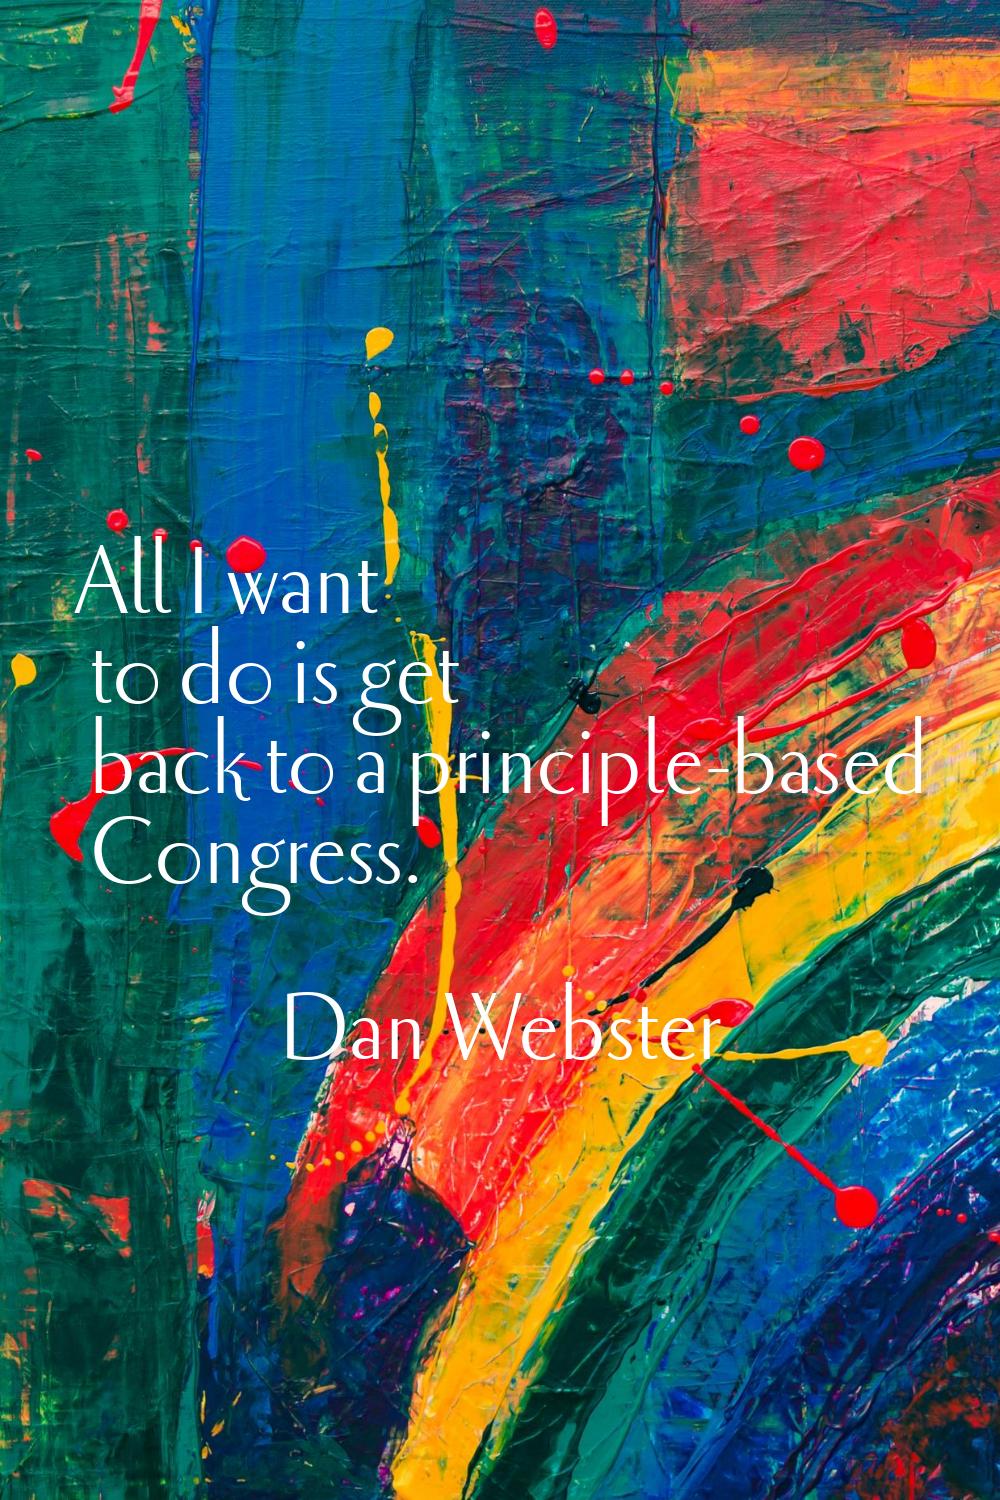 All I want to do is get back to a principle-based Congress.